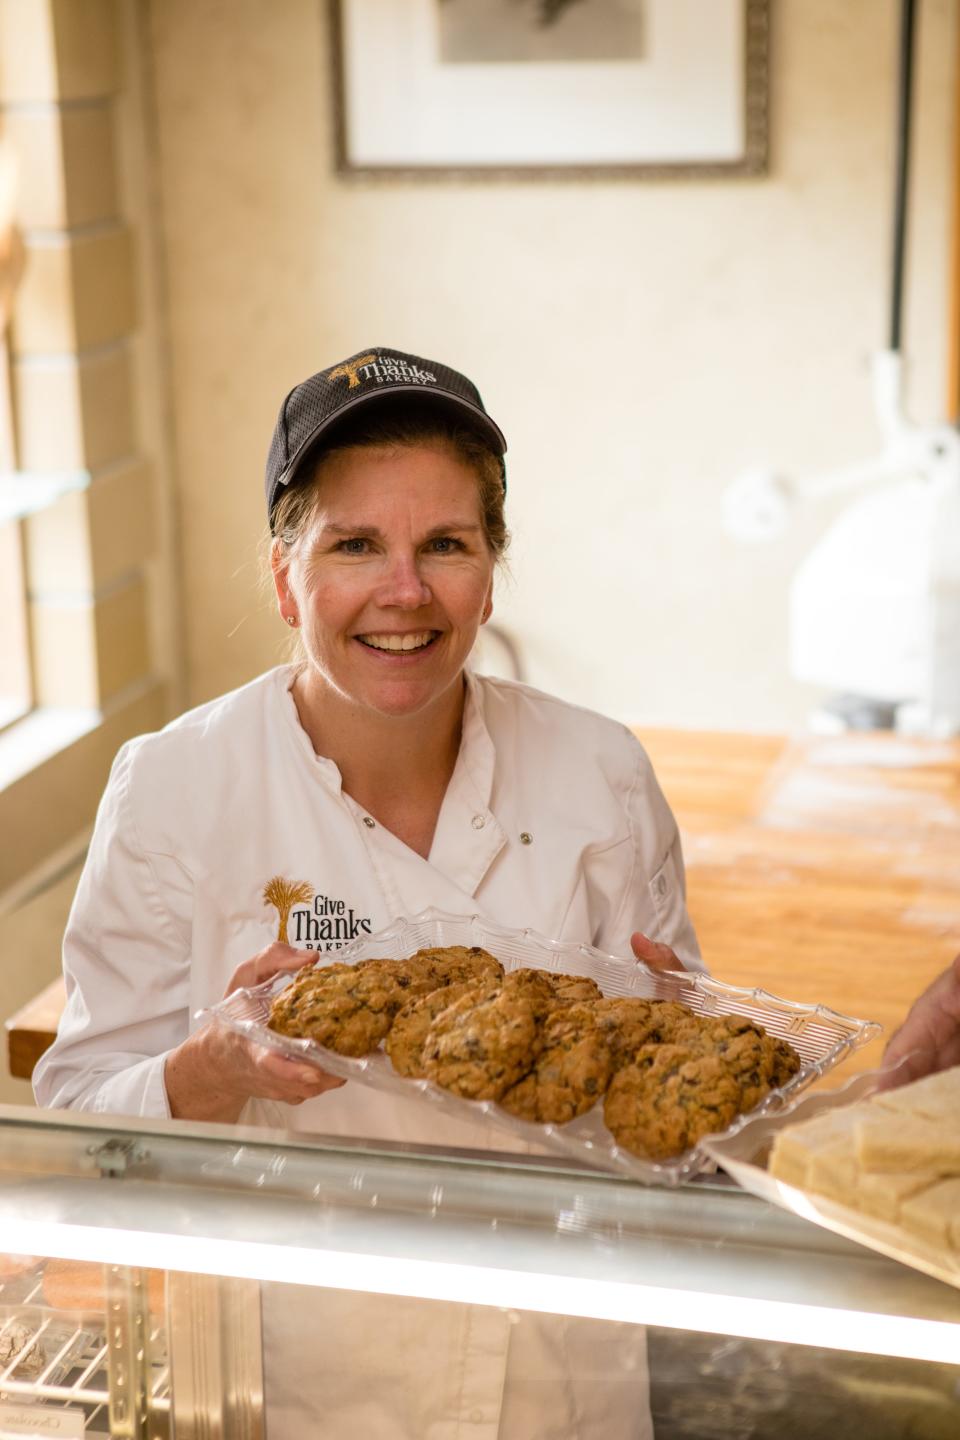 Katy Knoer is the owner of Give Thanks Bakery and is opening a second location in Midtown Detroit.